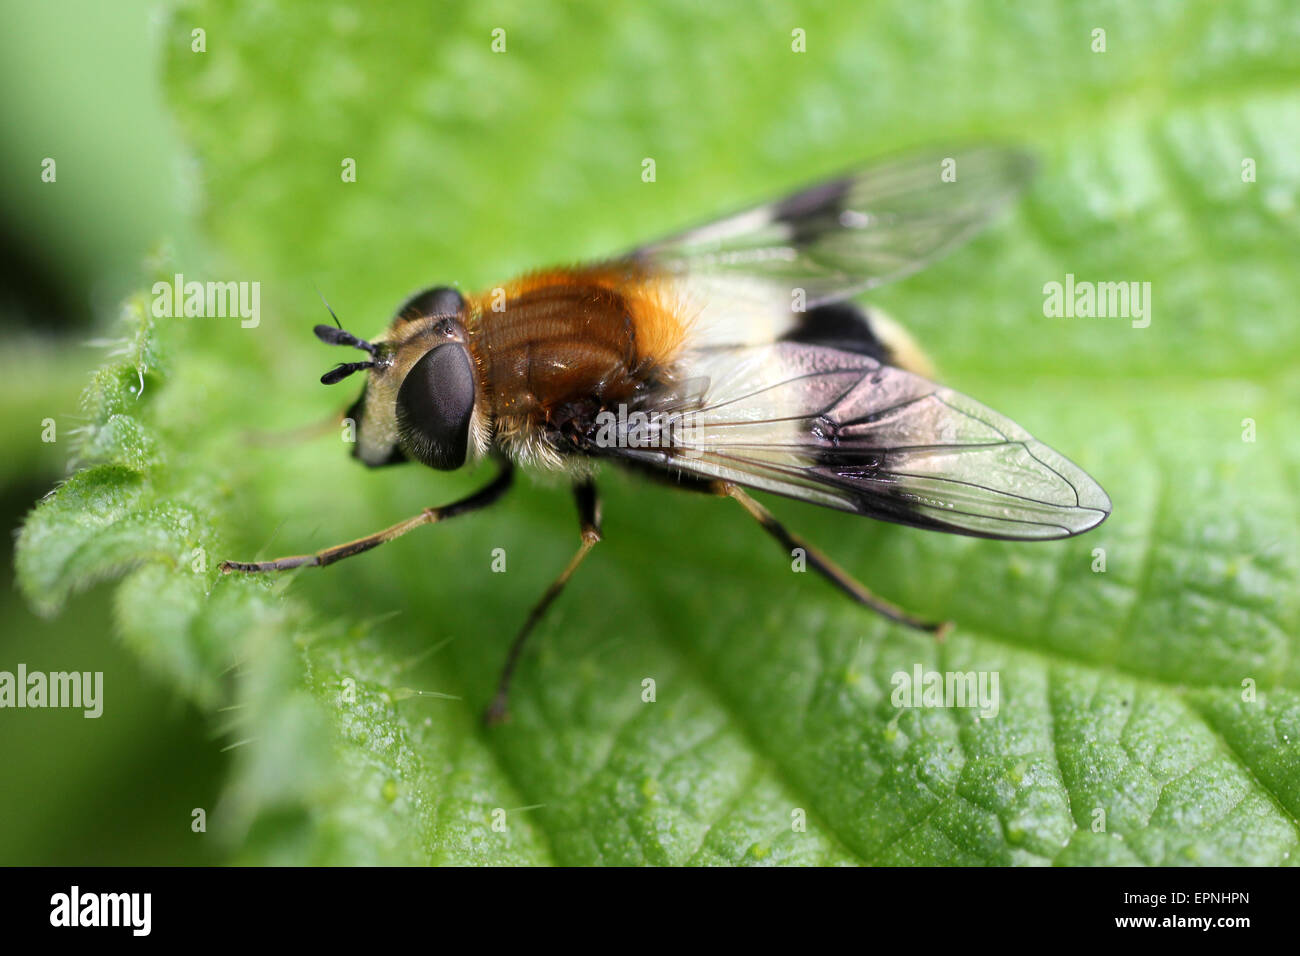 Hoverfly Leucozona lucorum Banque D'Images